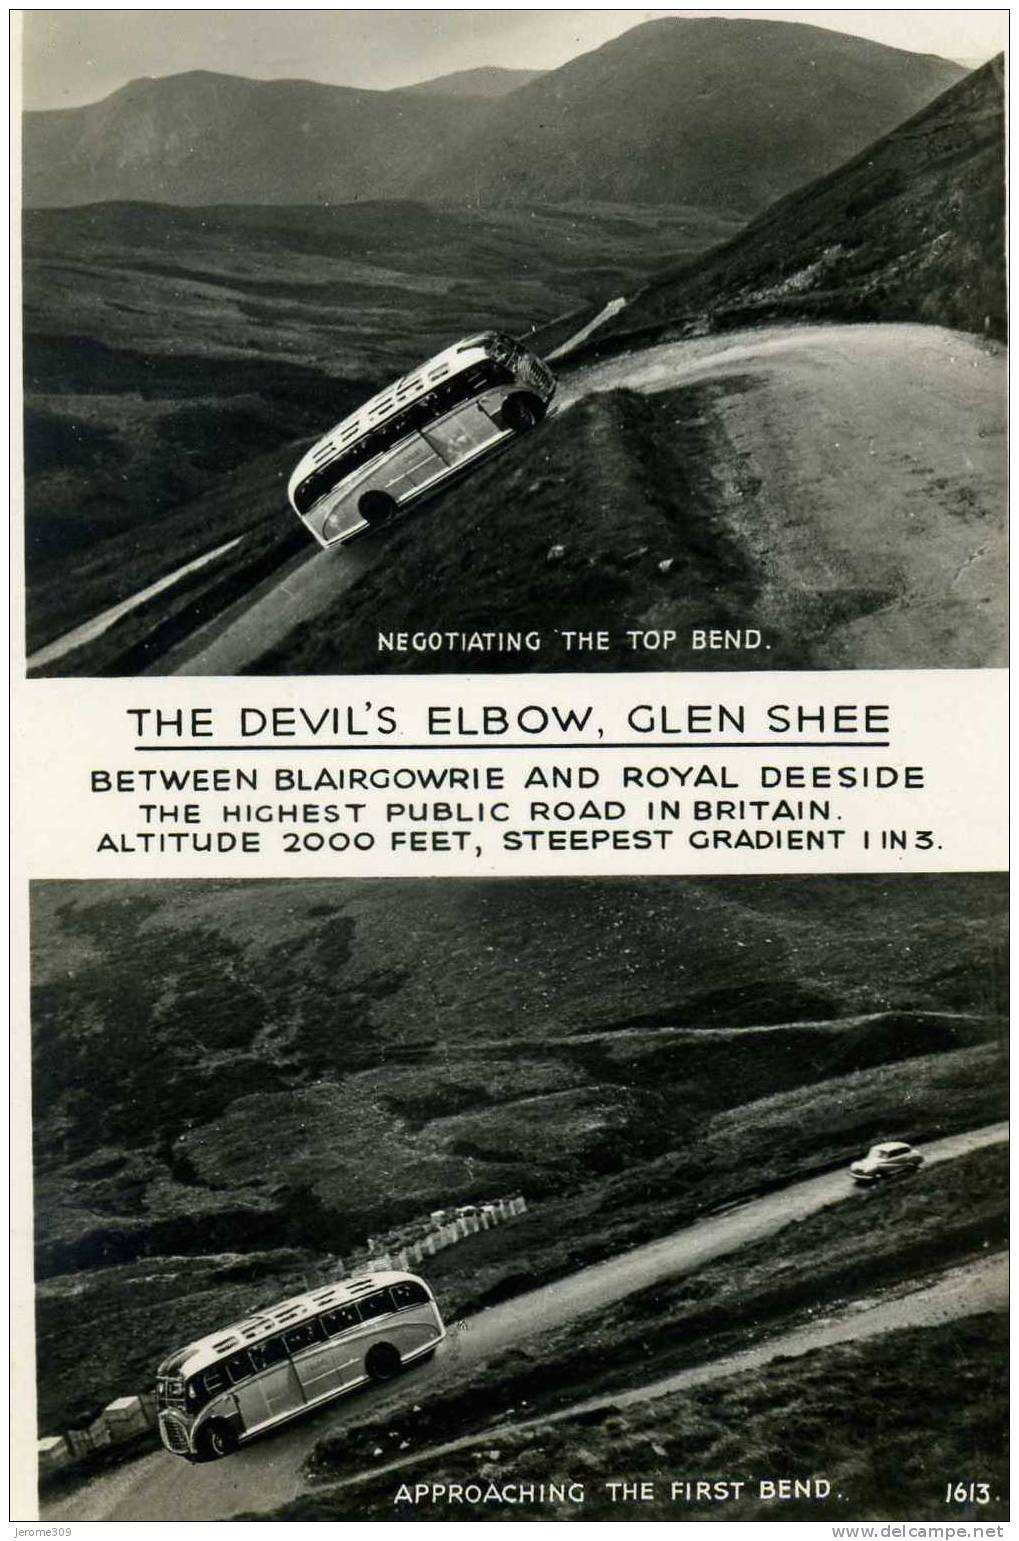 ROYAUME-UNI - GLEN SHEE - CPA - N°1613 - Glen Shee, THE DEVIL'S ELBOW - Between Blairgowrie And Royal Deeside-Bus - Kinross-shire